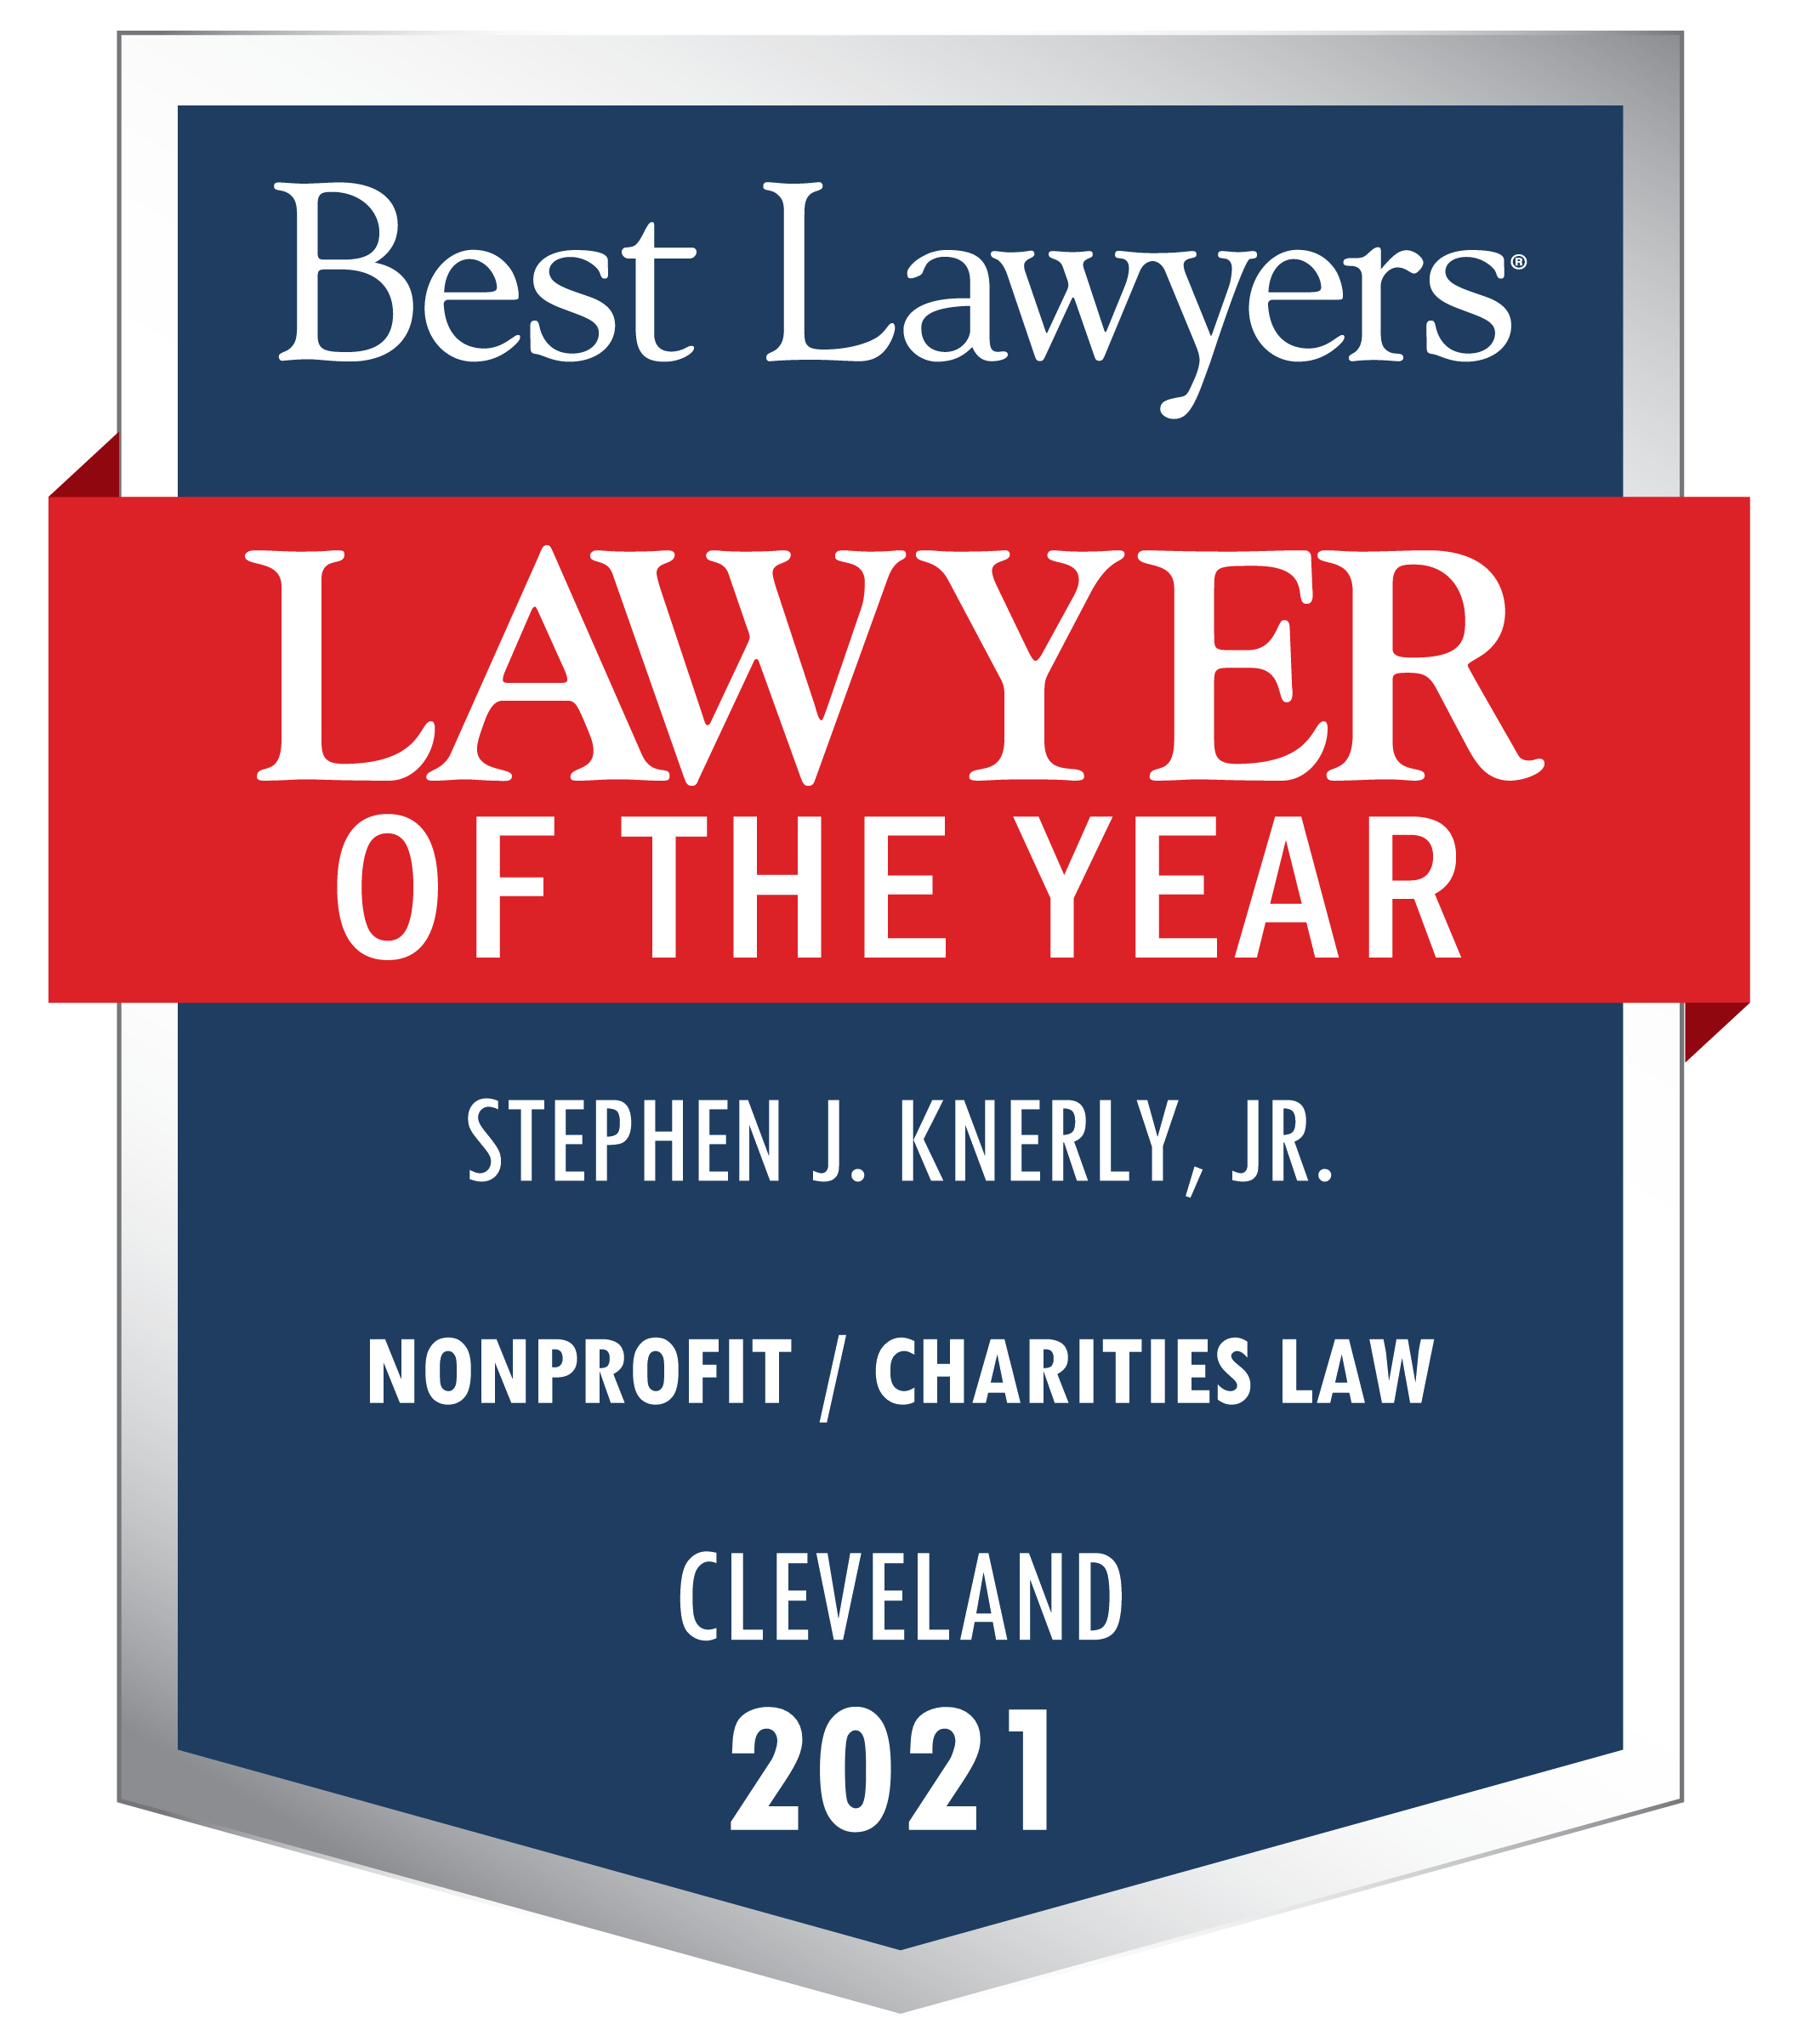 Best Lawyers Lawyer of the year Stephen J. Knerly, JR